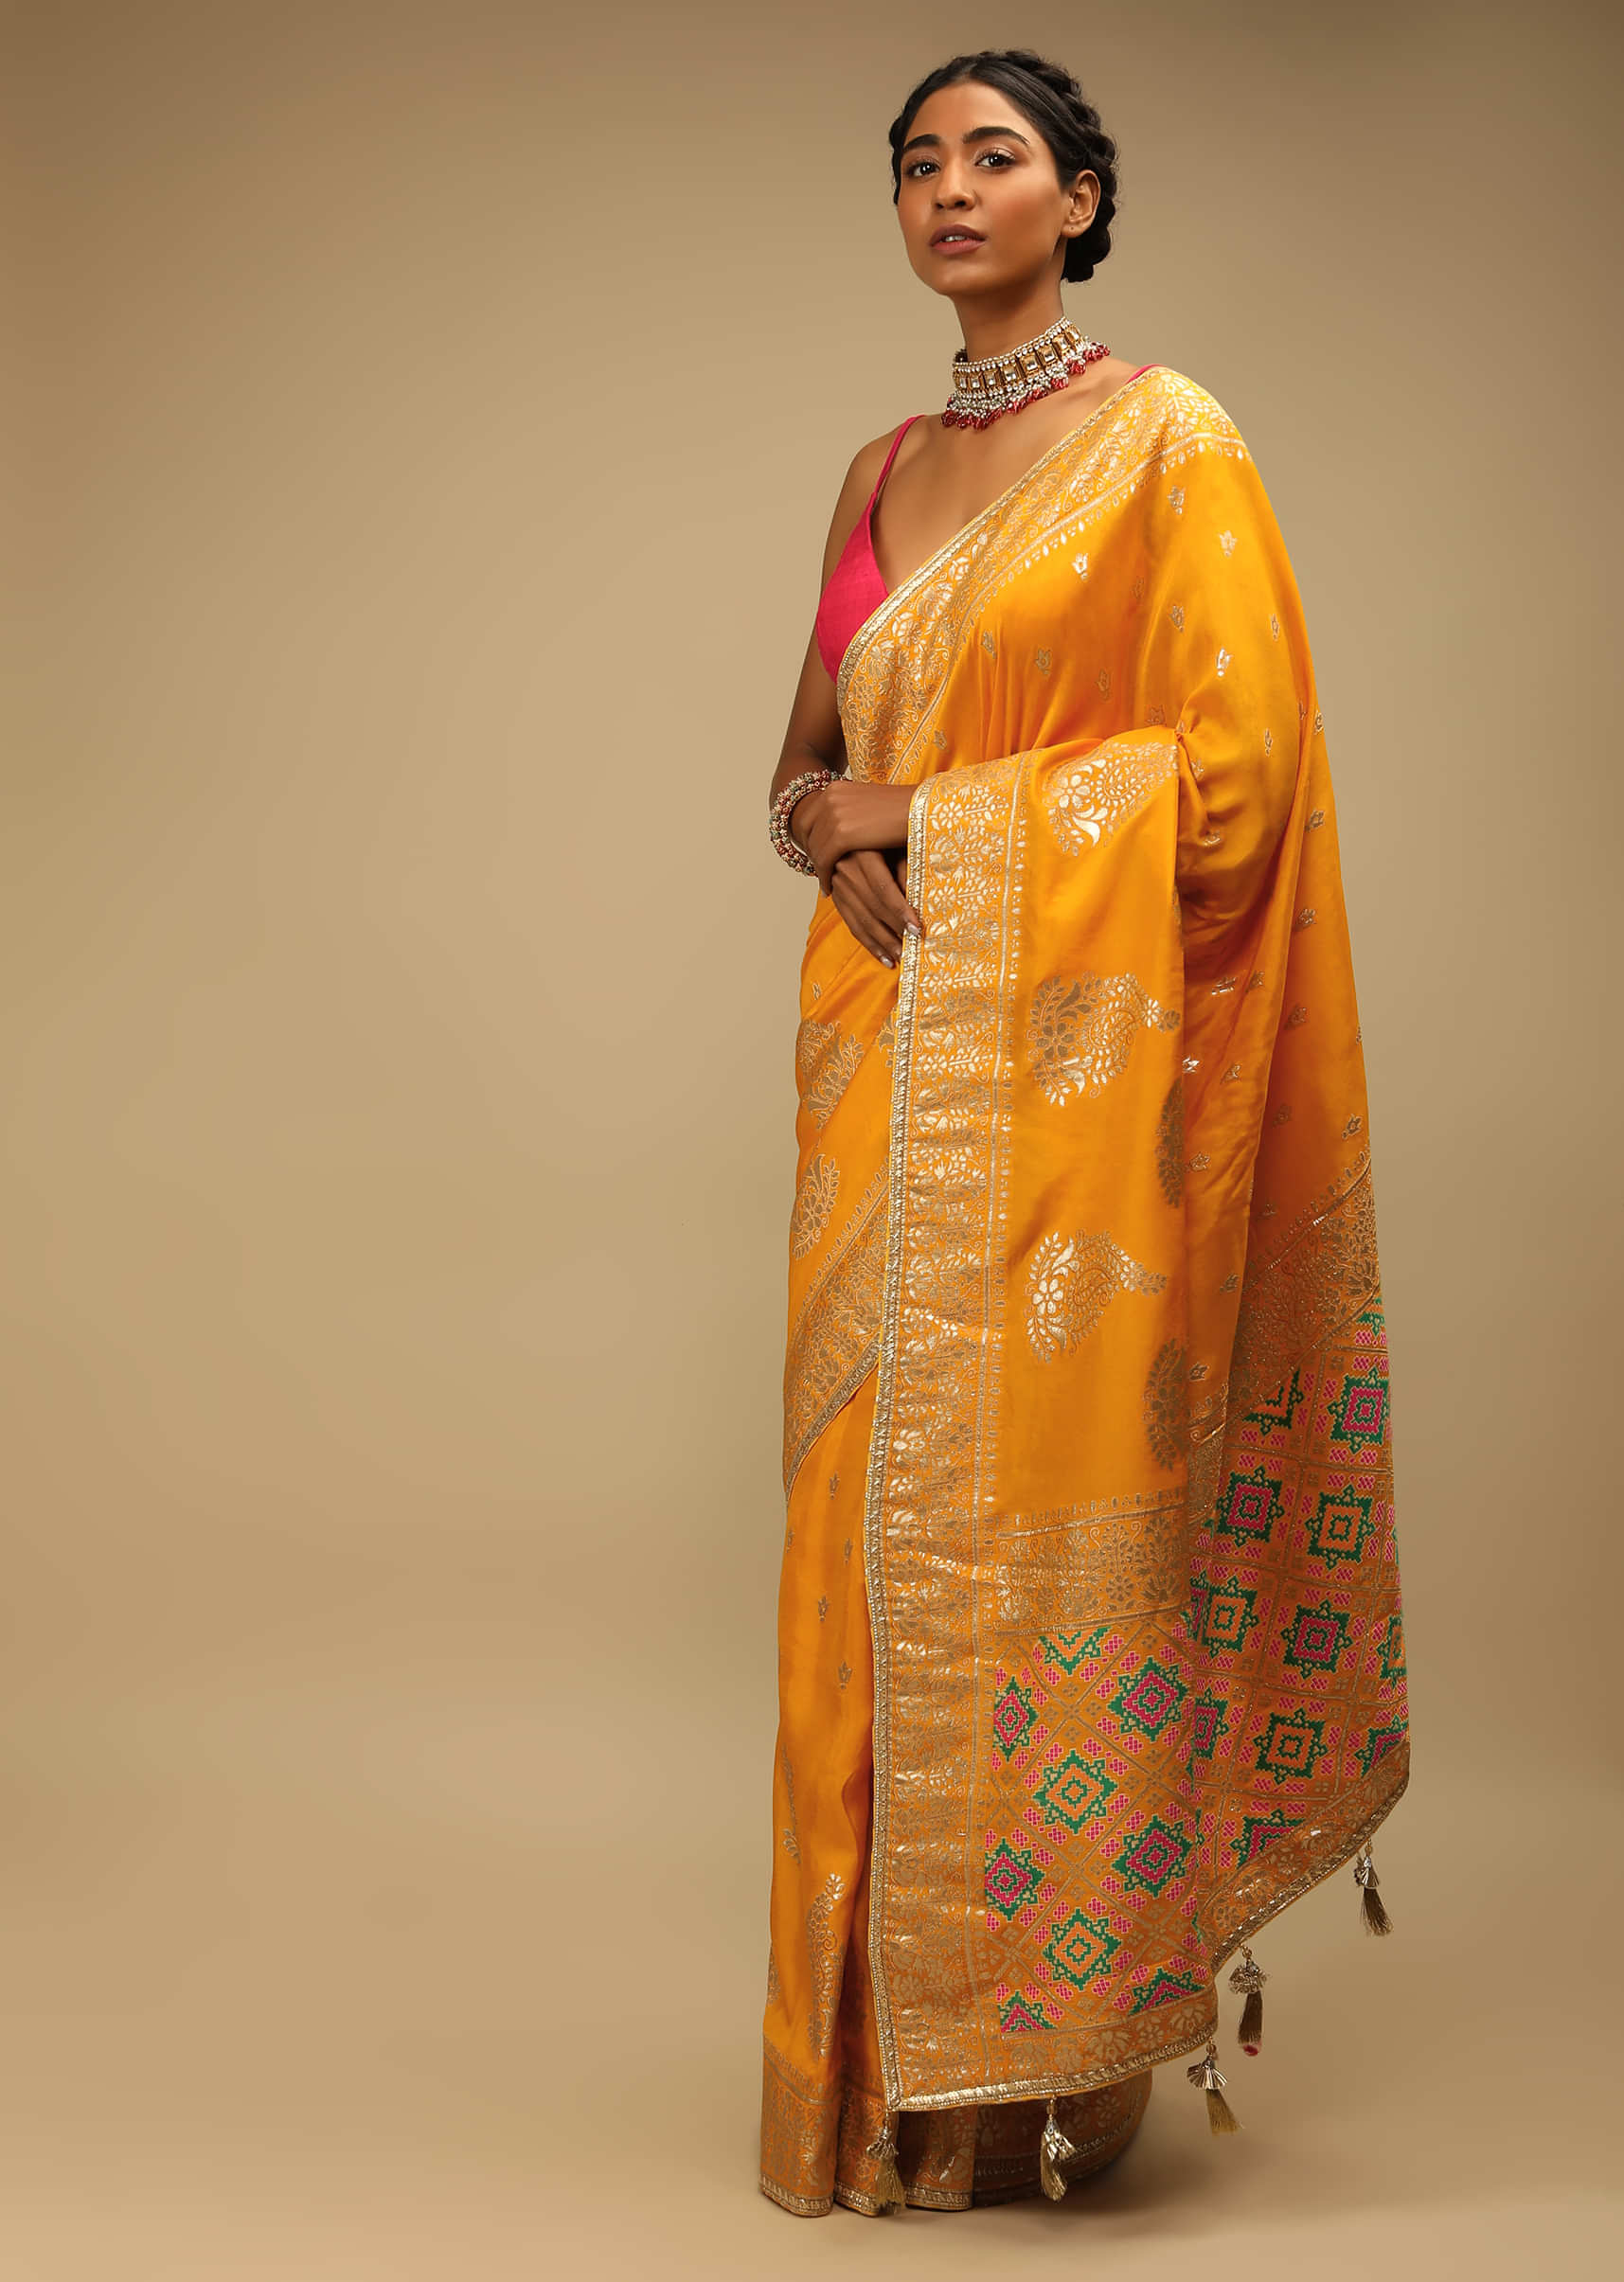 Amber Yellow Saree In Dupion Silk With Multi Colored Woven Patola Pallu And Golden Paisley Buttis All Over  